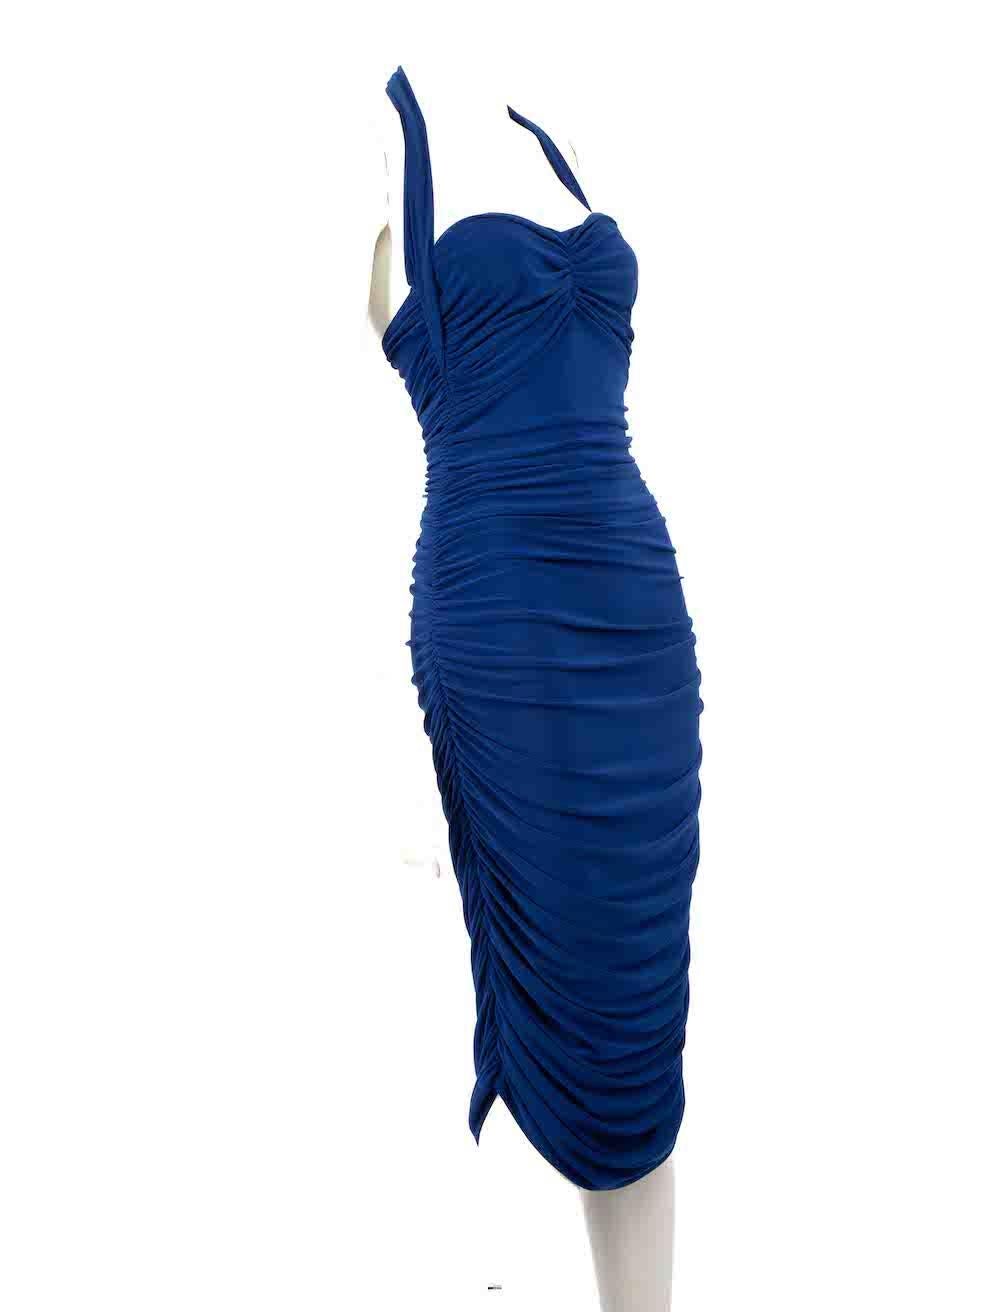 CONDITION is Very good. Hardly any visible wear to dress is evident on this used Norma Kamali designer resale item.
 
 
 
 Details
 
 
 Blue
 
 Polyester
 
 Dress
 
 Bodycon
 
 Halterneck
 
 Sleeveless
 
 Knee length
 
 Ruched sides
 
 
 
 
 
 Made